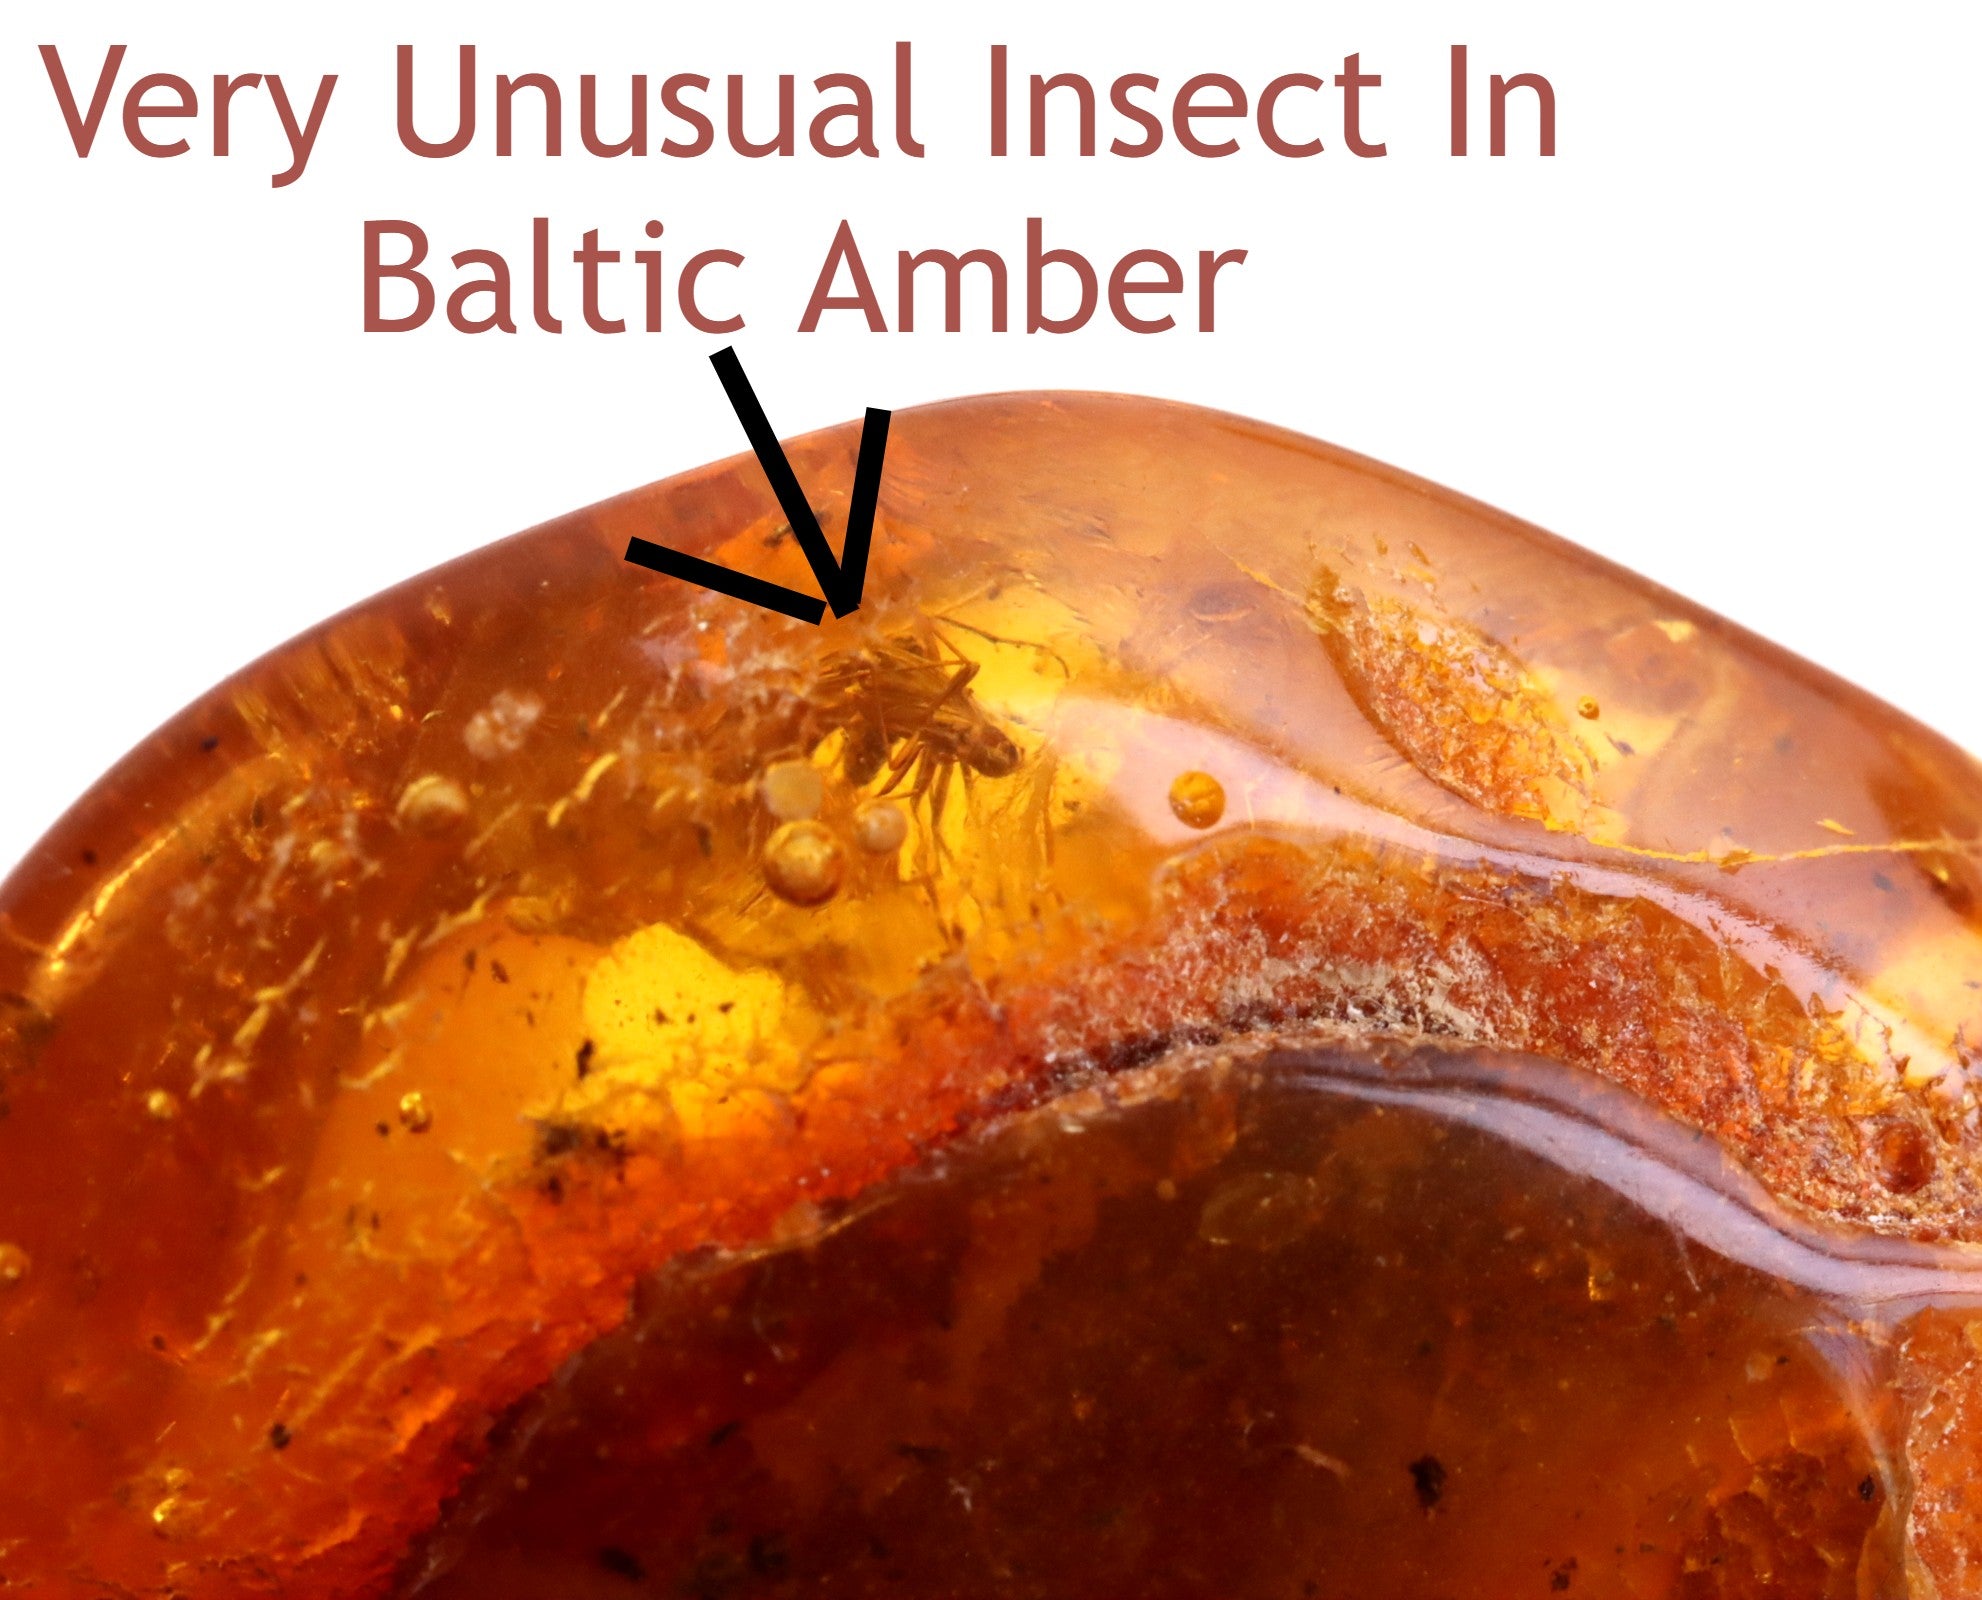 Insect in Amber 40 million year old Insect Inclusion Amulet